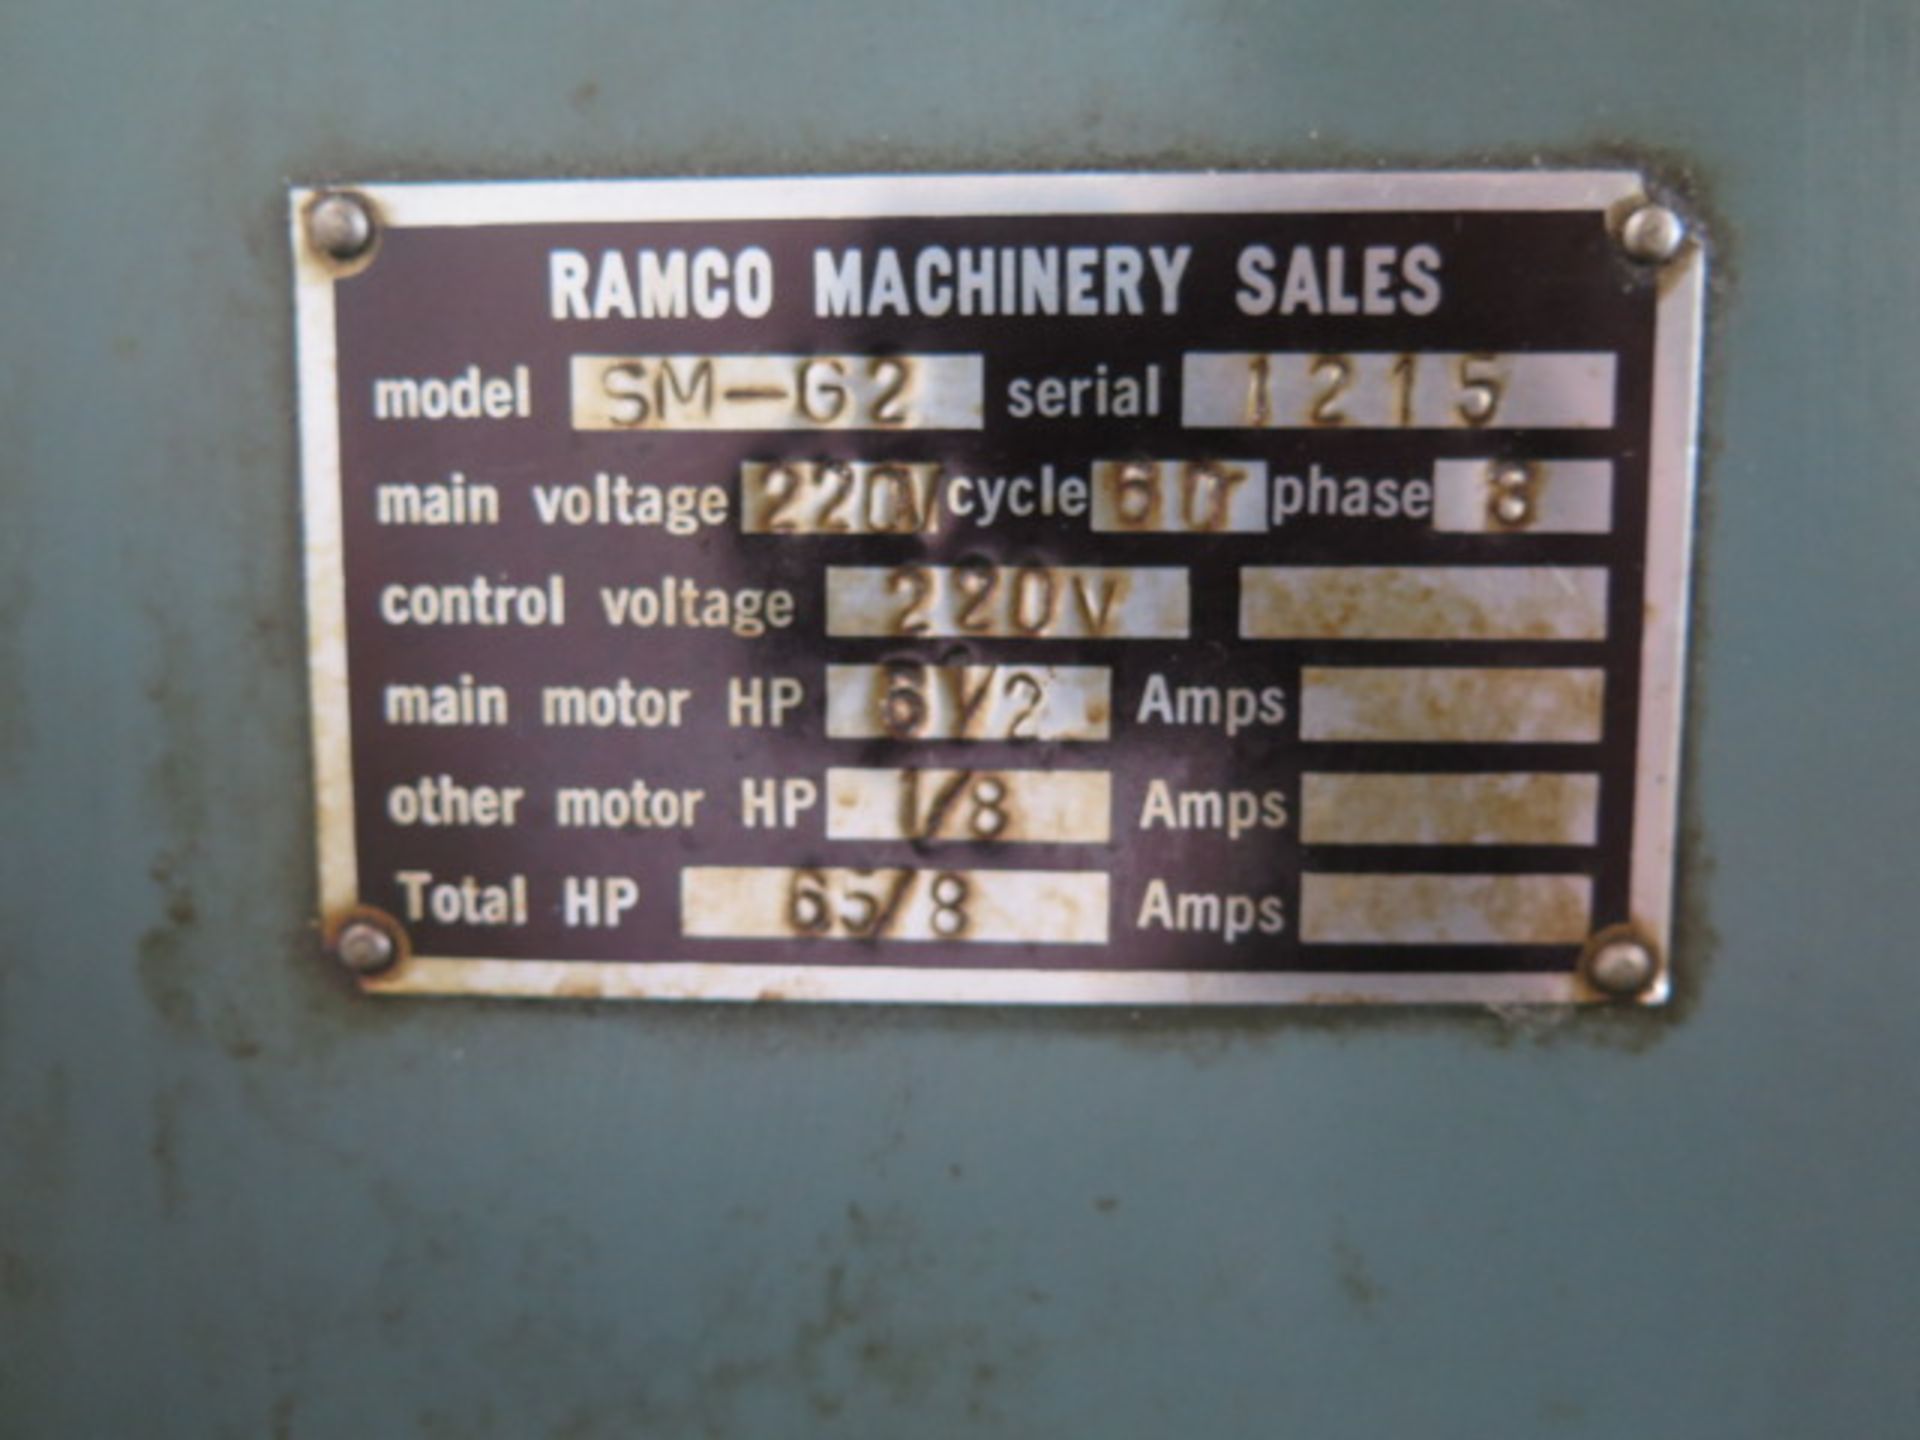 Ramco SM-G2 Universal Mill s/n 1215 w/ 40-Taper Vertical Spindle @ 220-3330 RPM, 40-Taper Horizontal - Image 13 of 13